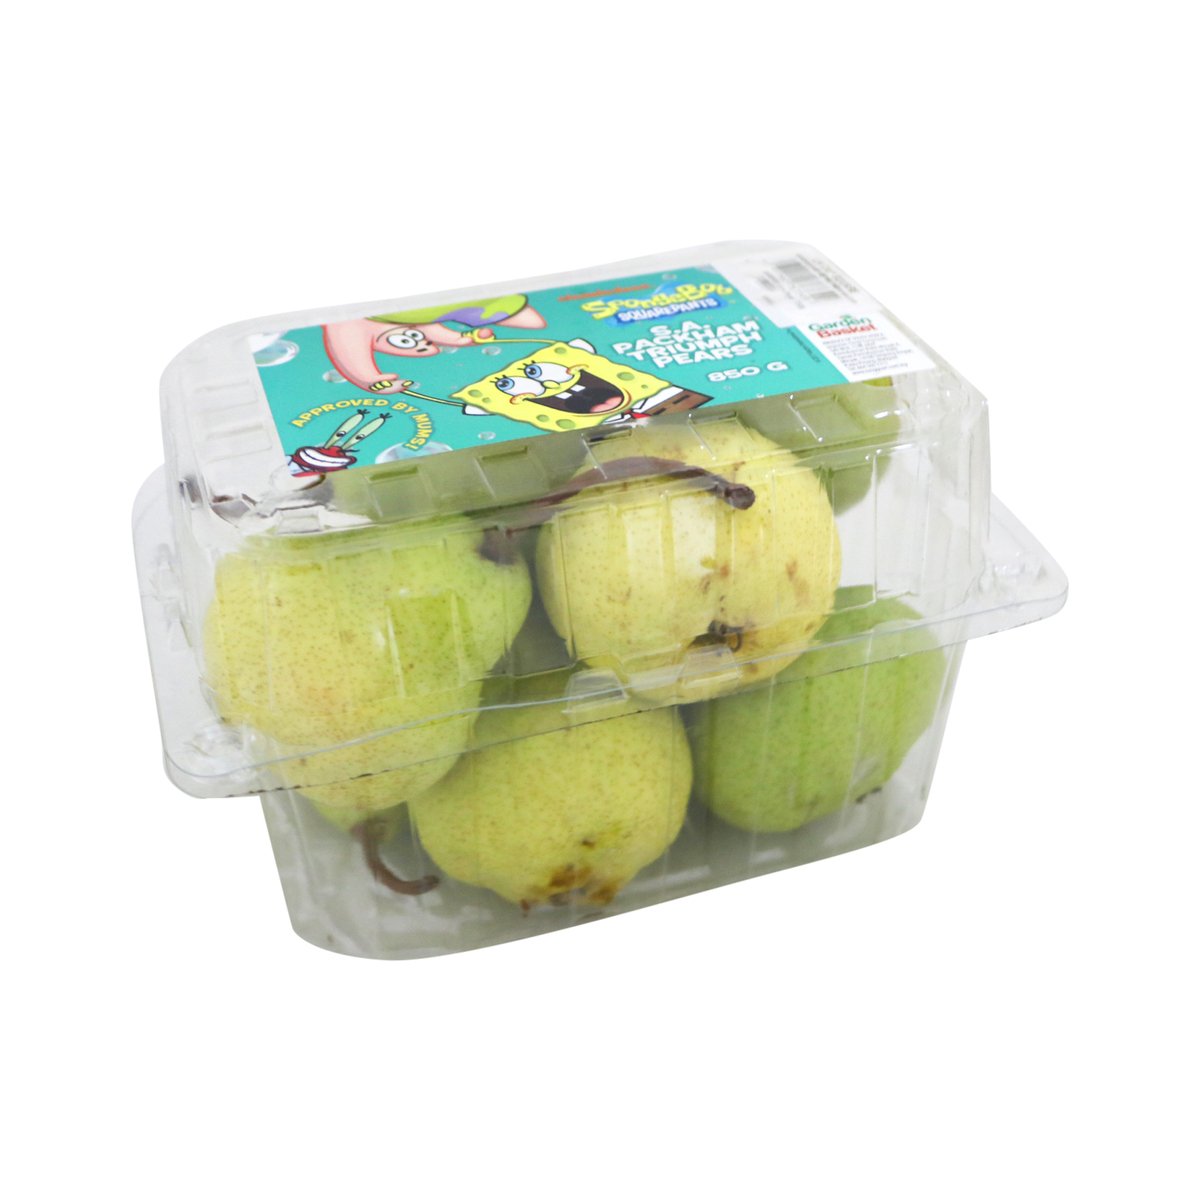 Spongebob Packem Pear ( Spongebob Packem Pear ) Packet 750g Approx Weight